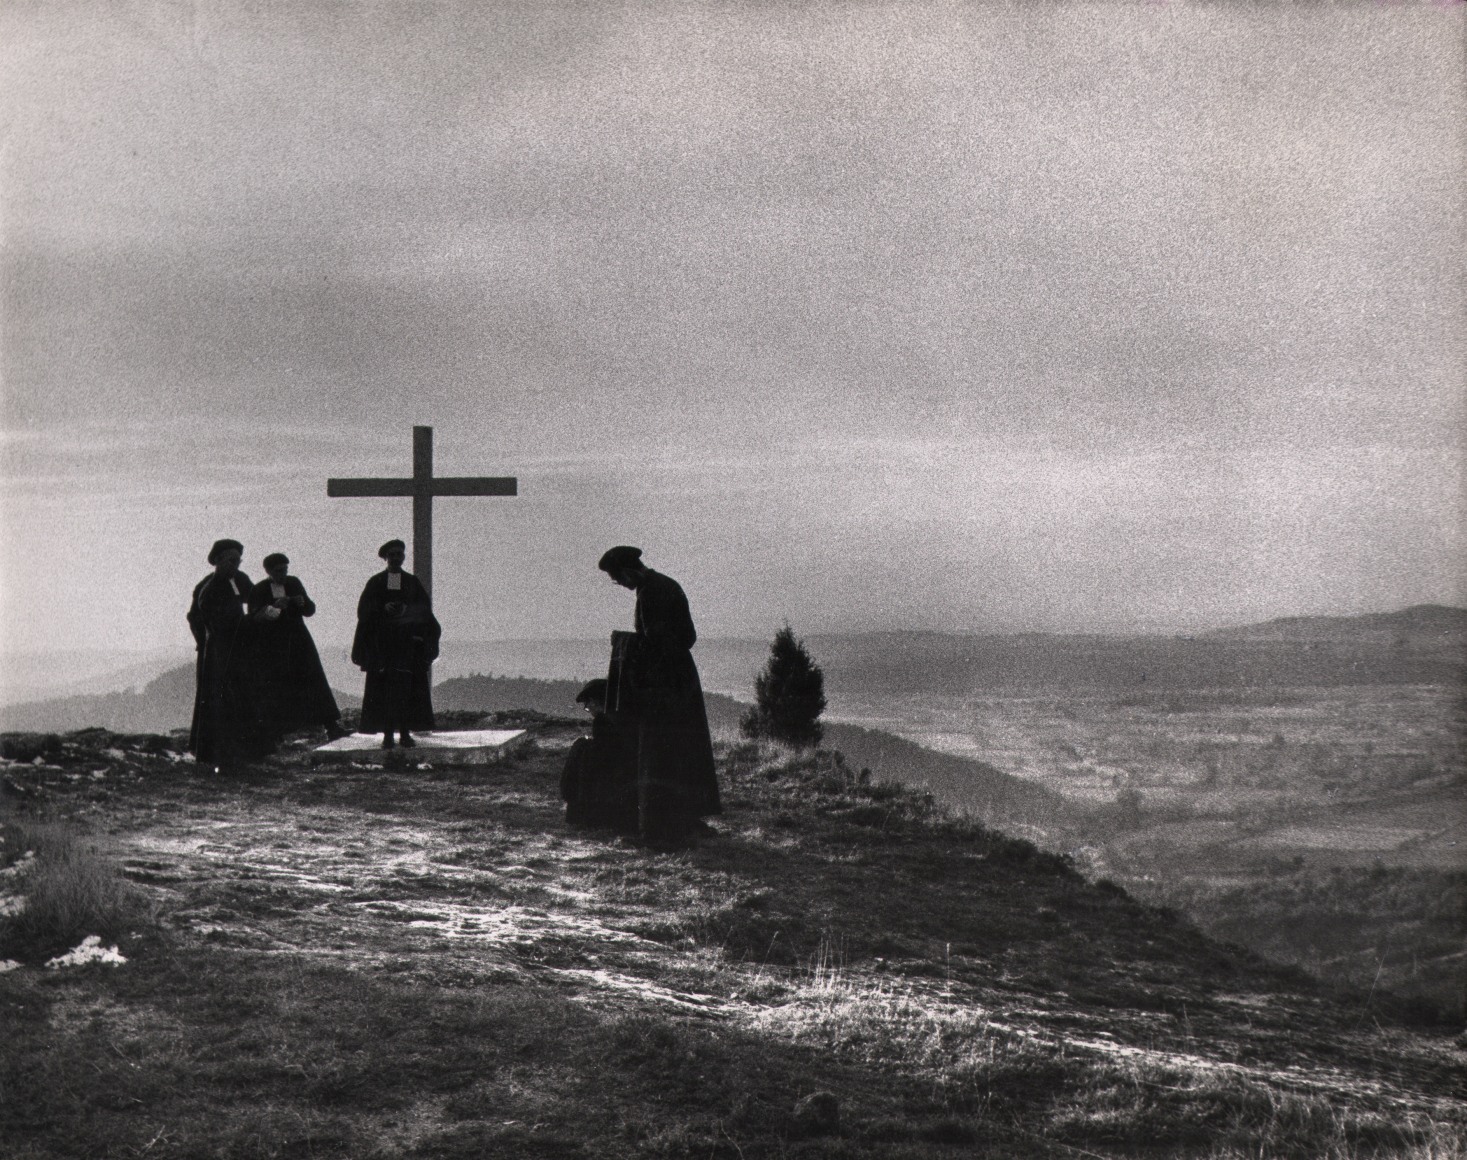 41. Sabine Weiss, France, 1956. Silhouetted, robed figures on a mountaintop with a cross.